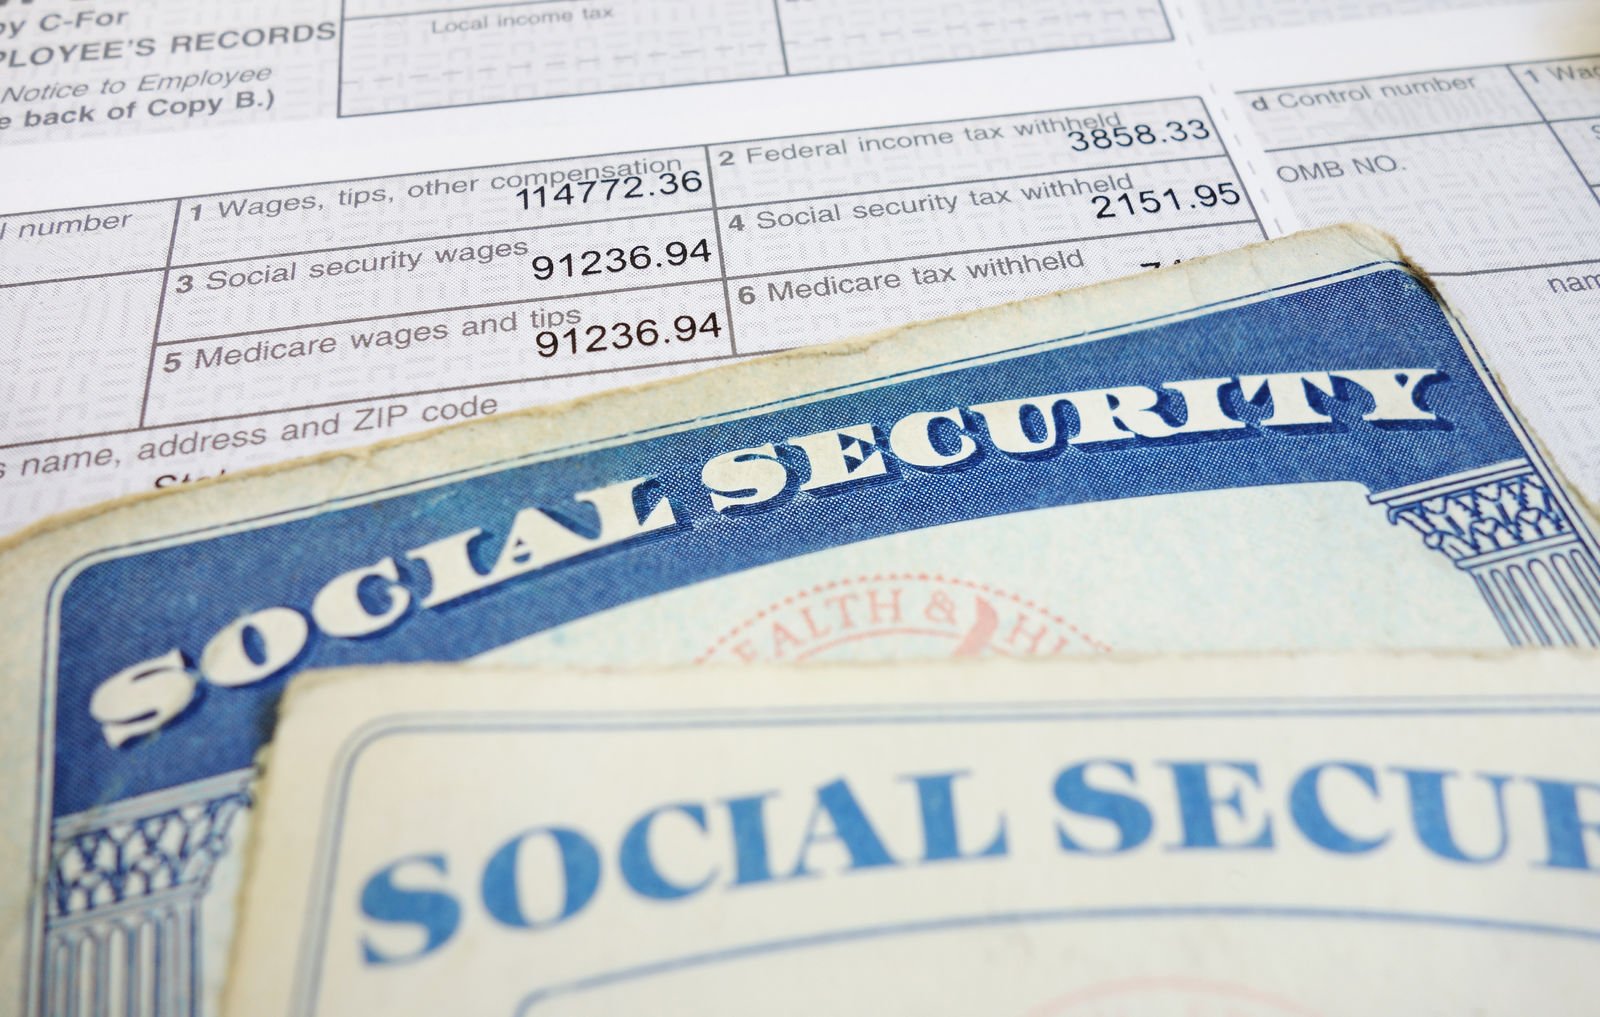 Do auto insurance companies need your Social Security number?